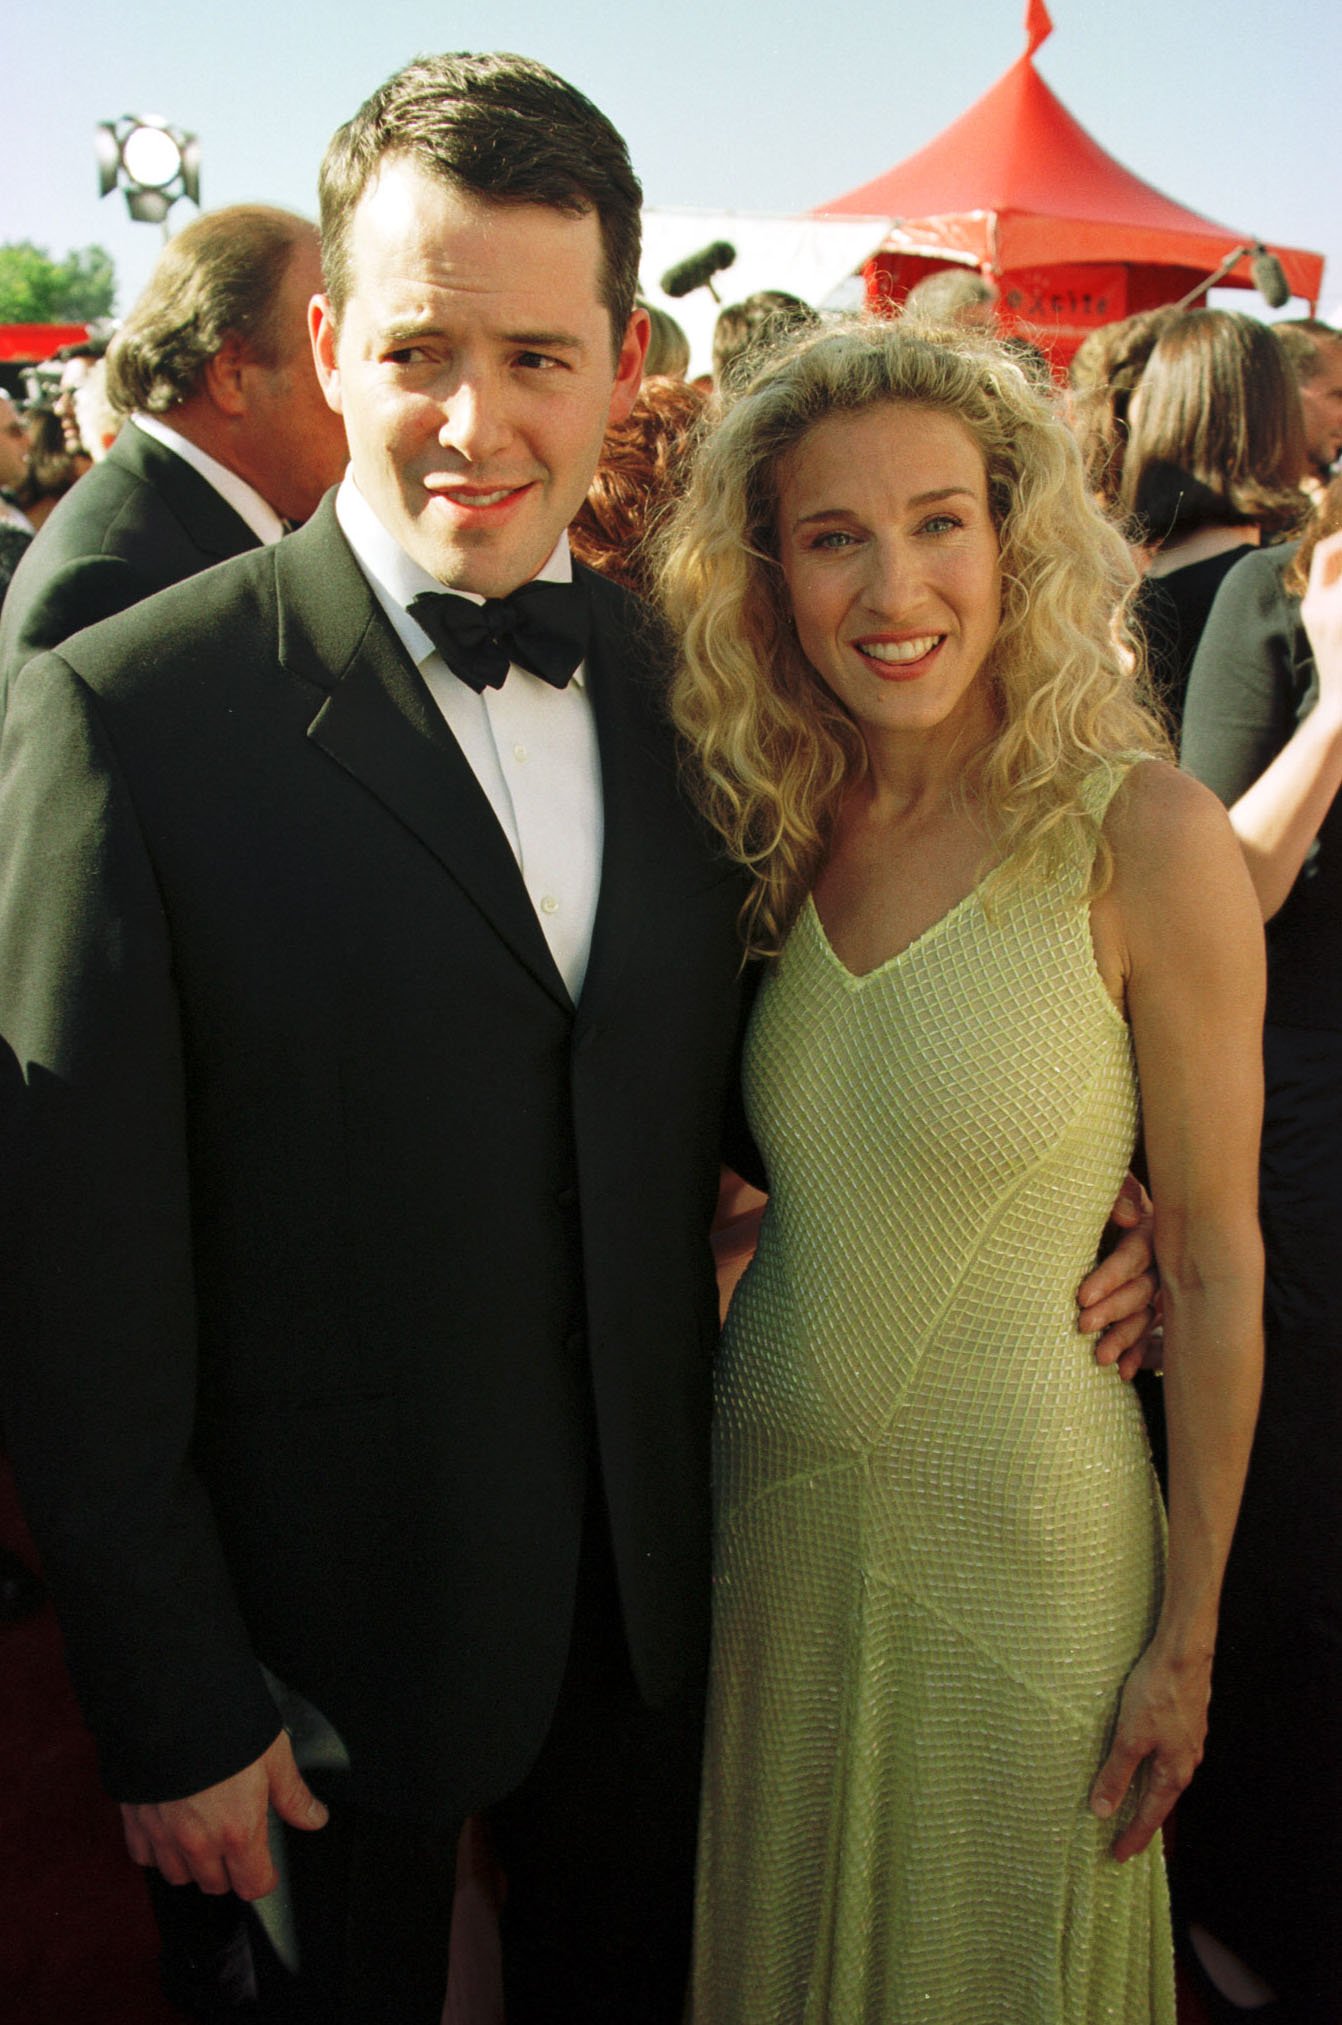 Sarah Jessica Parker and Matthew Broderick | Photo: Getty Images